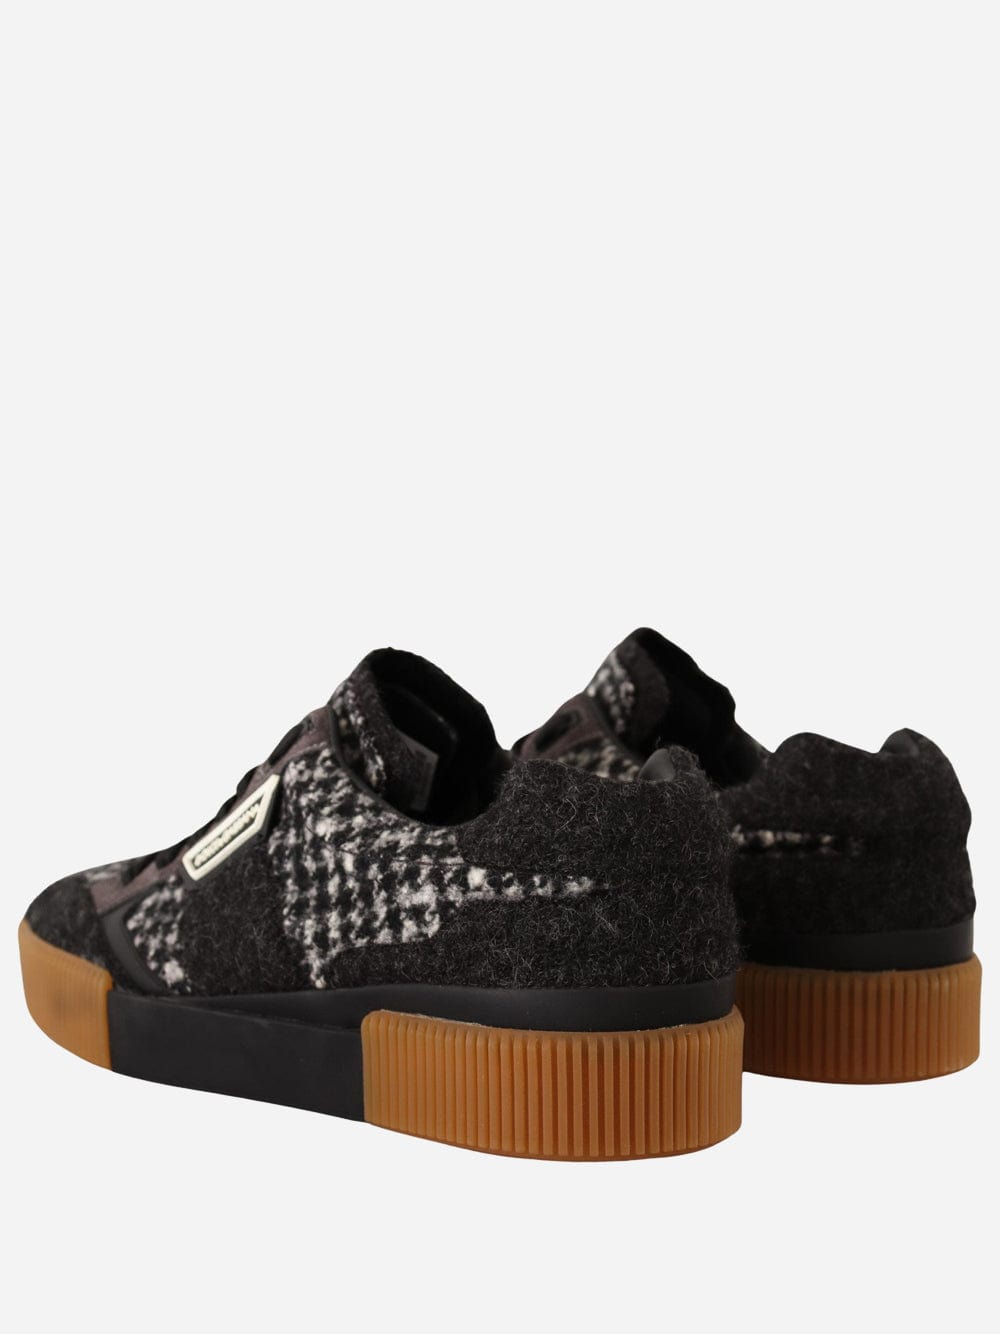 Dolce & Gabbana Plaid Miami DNA Low Top Sneakers